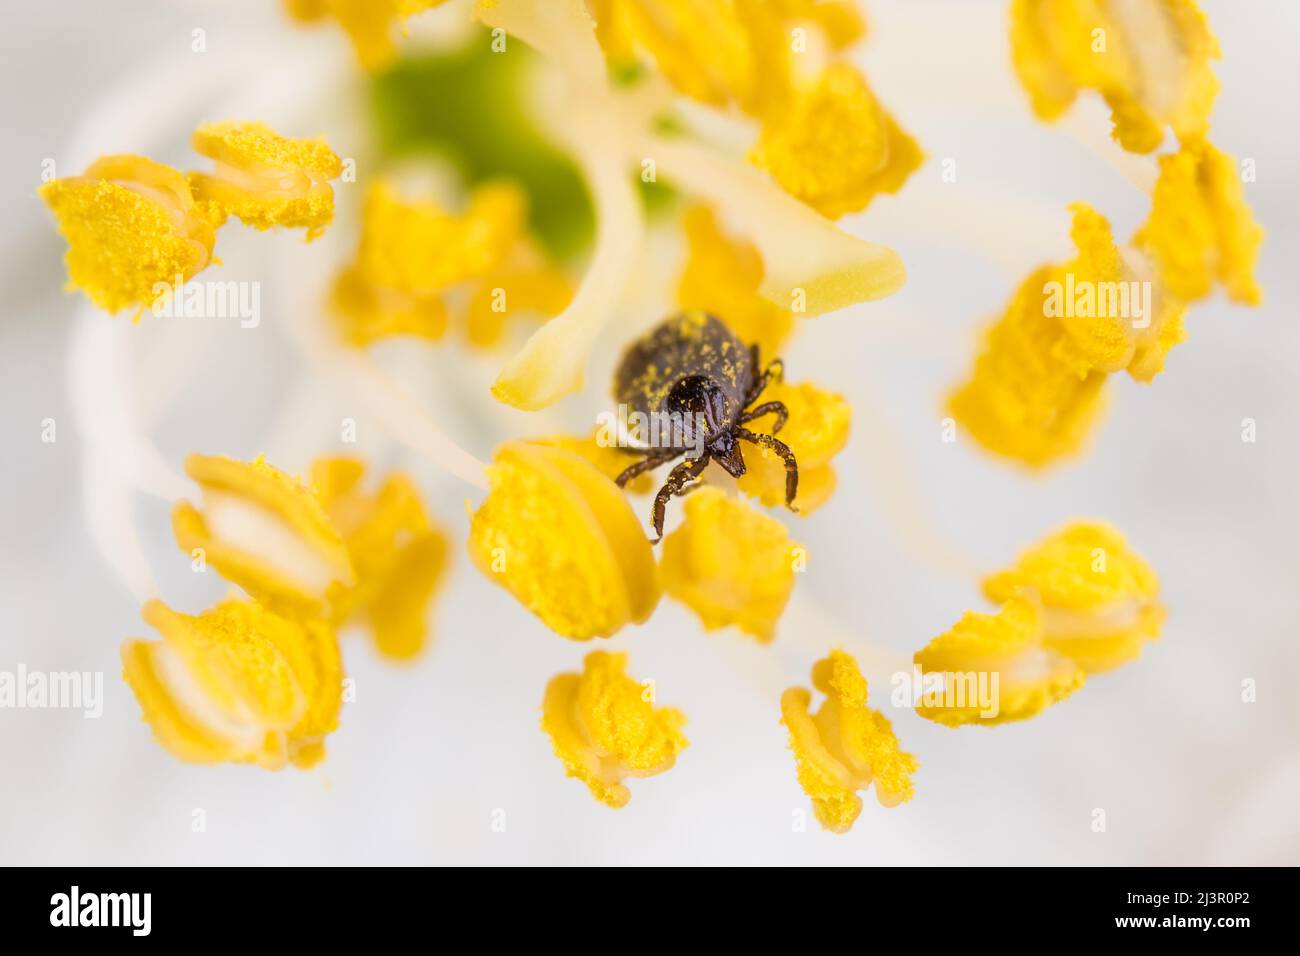 Female deer tick crawling on a yellow stamen of a bloom with white petals. Ixodes ricinus. Small parasite in spring flower detail with pollen grains. Stock Photo